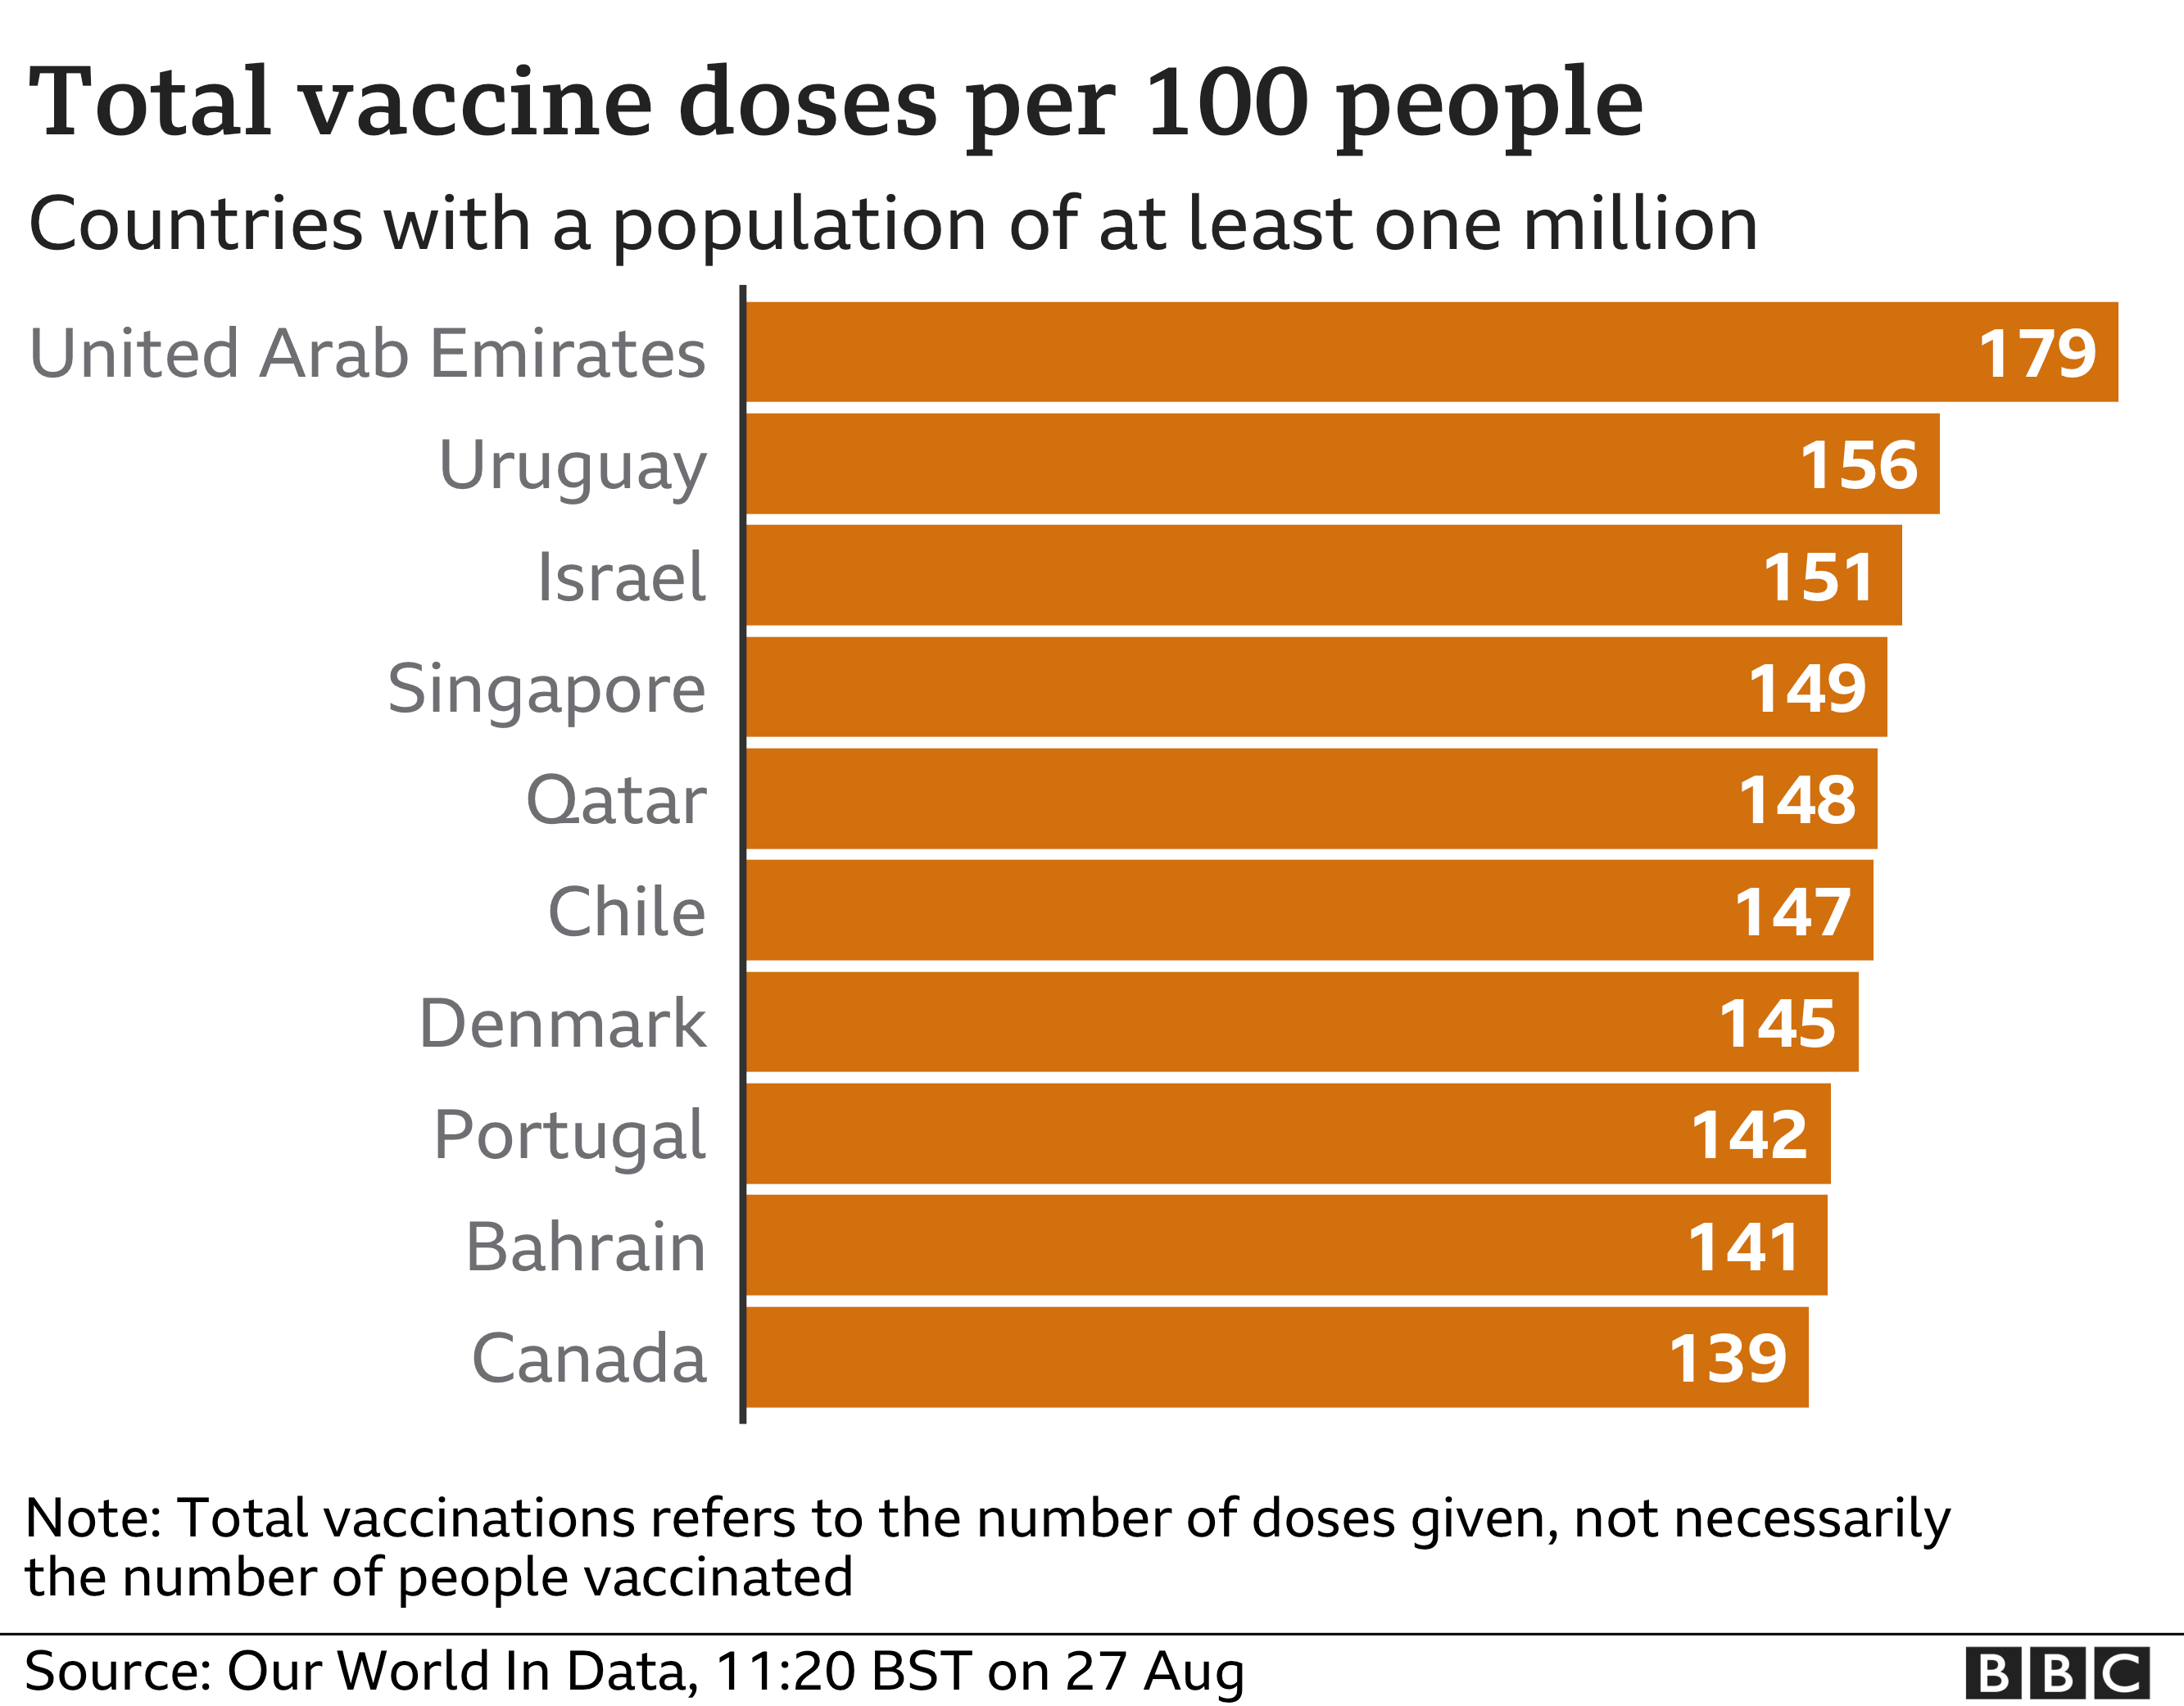 Chart showing vaccine doses per 100 people in countries where the population is over one million